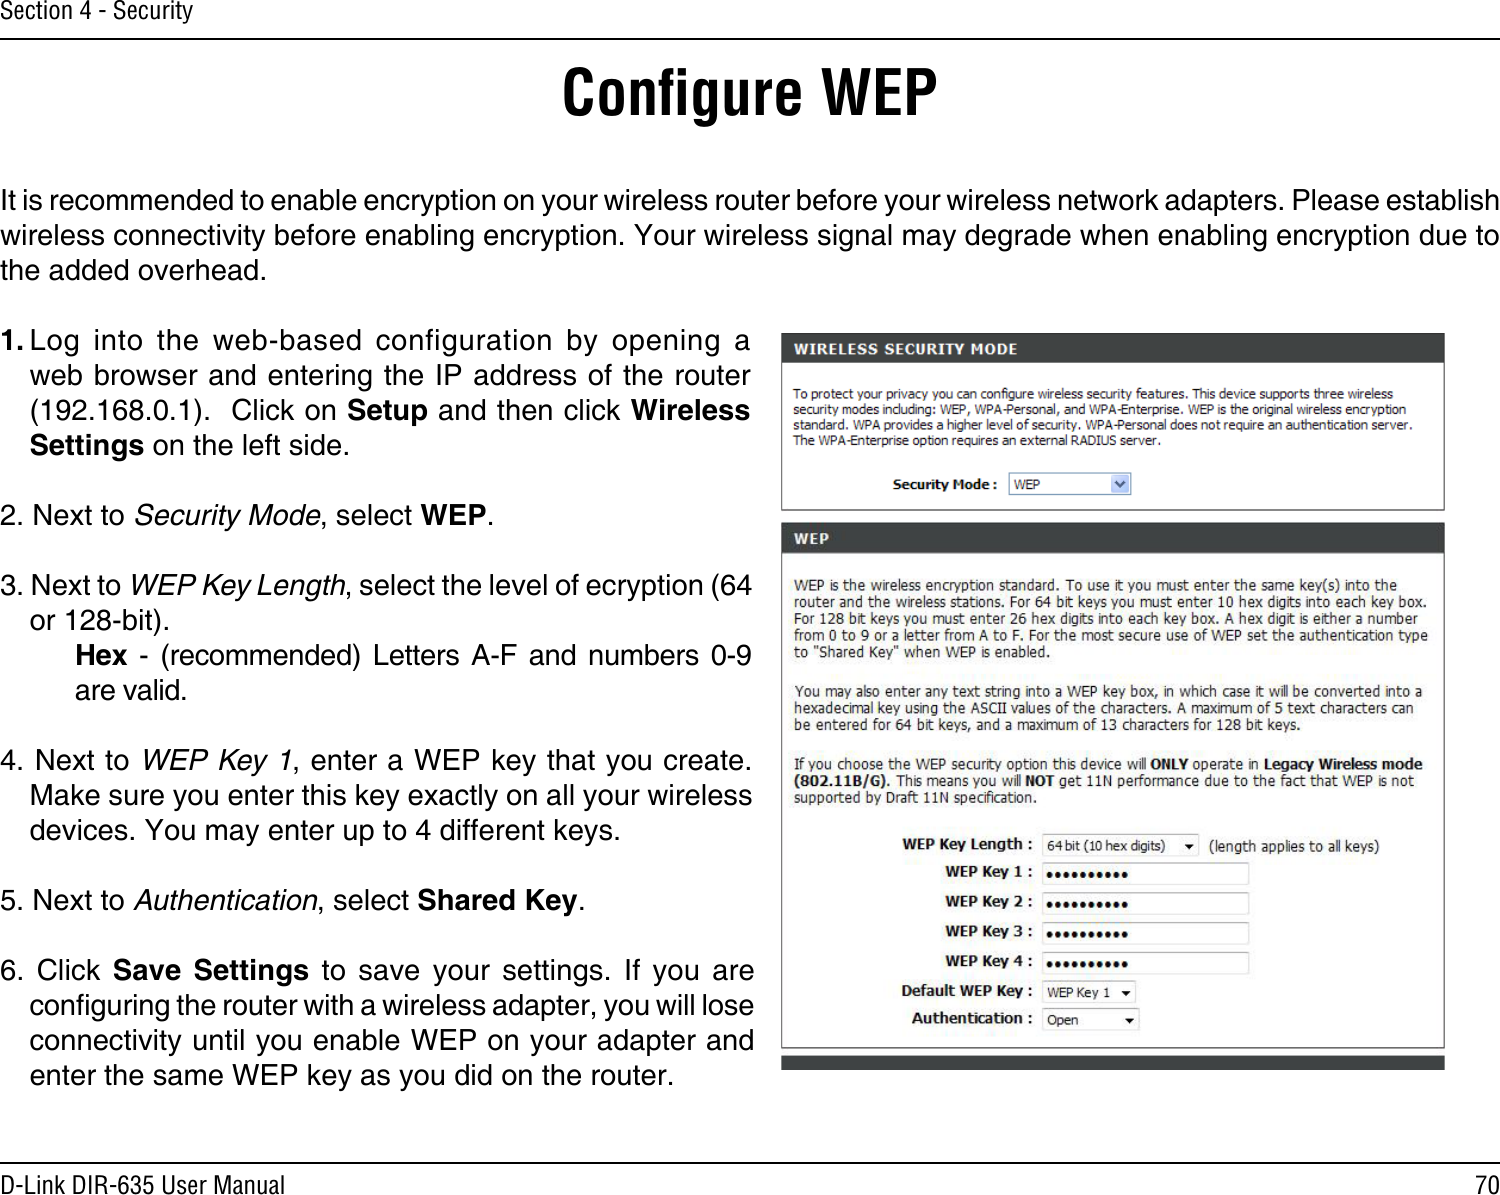 70D-Link DIR-635 User ManualSection 4 - SecurityConﬁgure WEPIt is recommended to enable encryption on your wireless router before your wireless network adapters. Please establish wireless connectivity before enabling encryption. Your wireless signal may degrade when enabling encryption due to the added overhead.1. Log  into  the  web-based  configuration  by  opening  a web browser and entering the IP address of the router (192.168.0.1).  Click on Setup and then click Wireless Settings on the left side.2. Next to Security Mode, select WEP.3. Next to WEP Key Length, select the level of ecryption (64 or 128-bit).    Hex  -  (recommended)  Letters  A-F and  numbers  0-9    are valid.   4. Next to WEP Key 1, enter a WEP key that you create. Make sure you enter this key exactly on all your wireless devices. You may enter up to 4 different keys.5. Next to Authentication, select Shared Key.6.  Click  Save  Settings  to  save  your  settings.  If  you  are conguring the router with a wireless adapter, you will lose connectivity until you enable WEP on your adapter and enter the same WEP key as you did on the router.